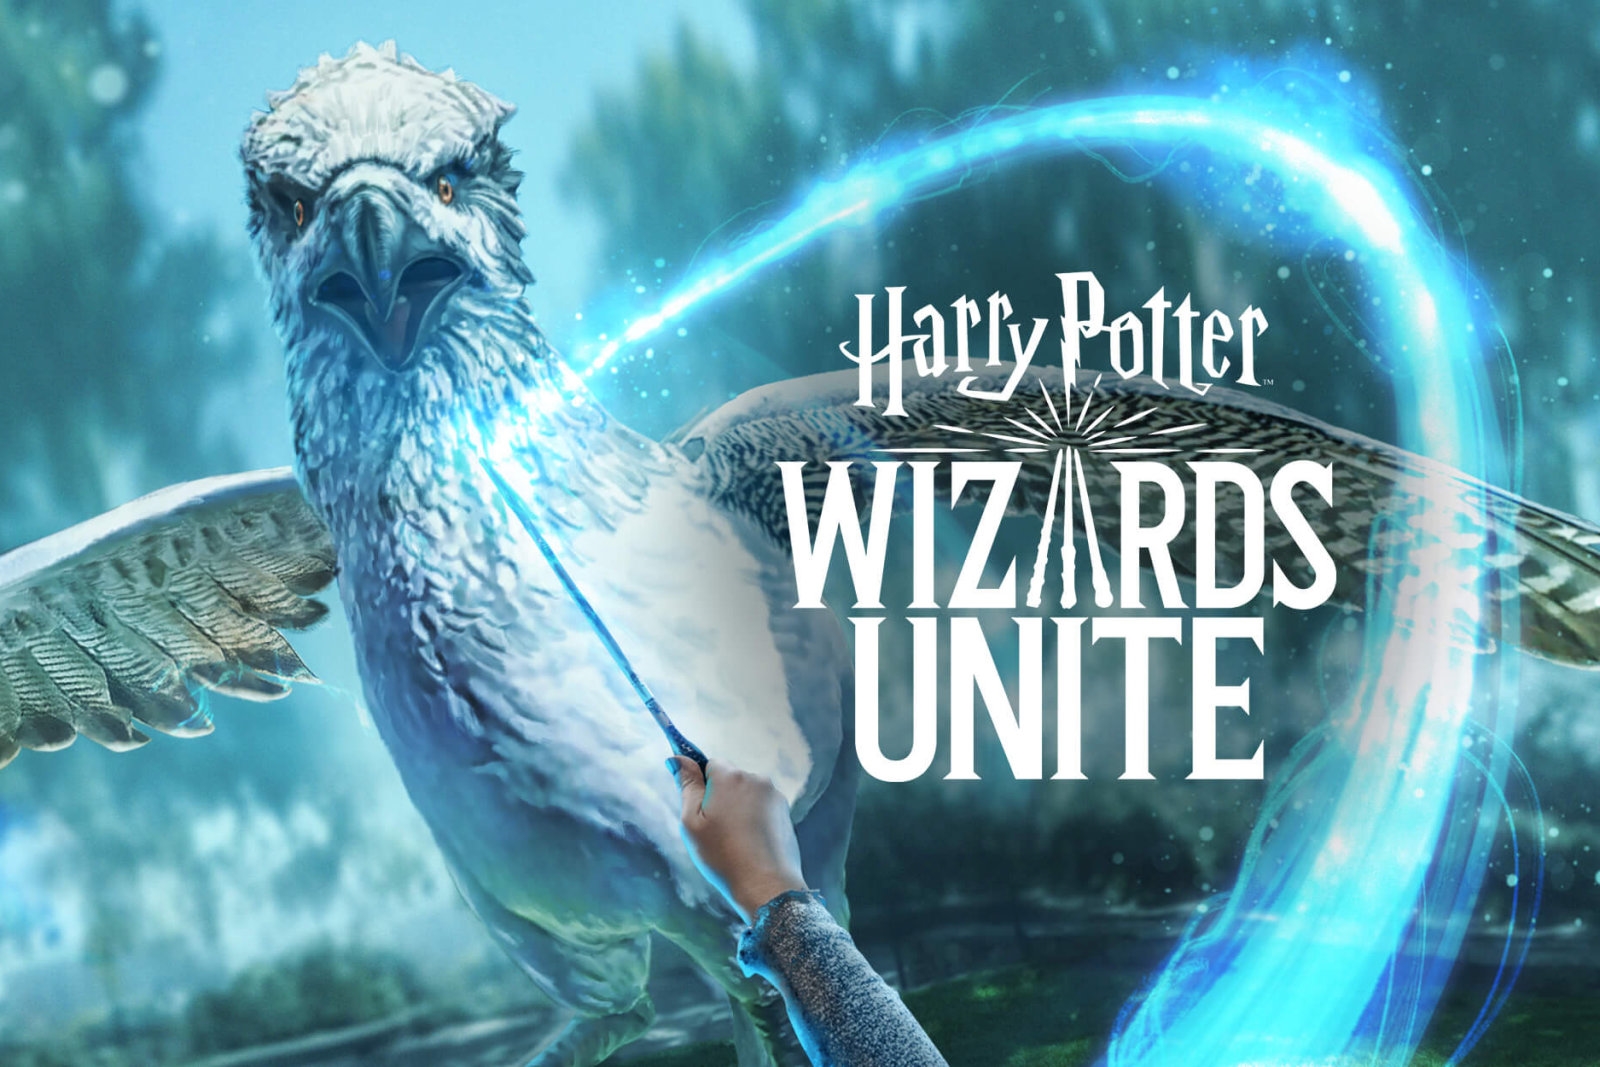 'Harry Potter: Wizards Unite' is about protecting muggles | DeviceDaily.com